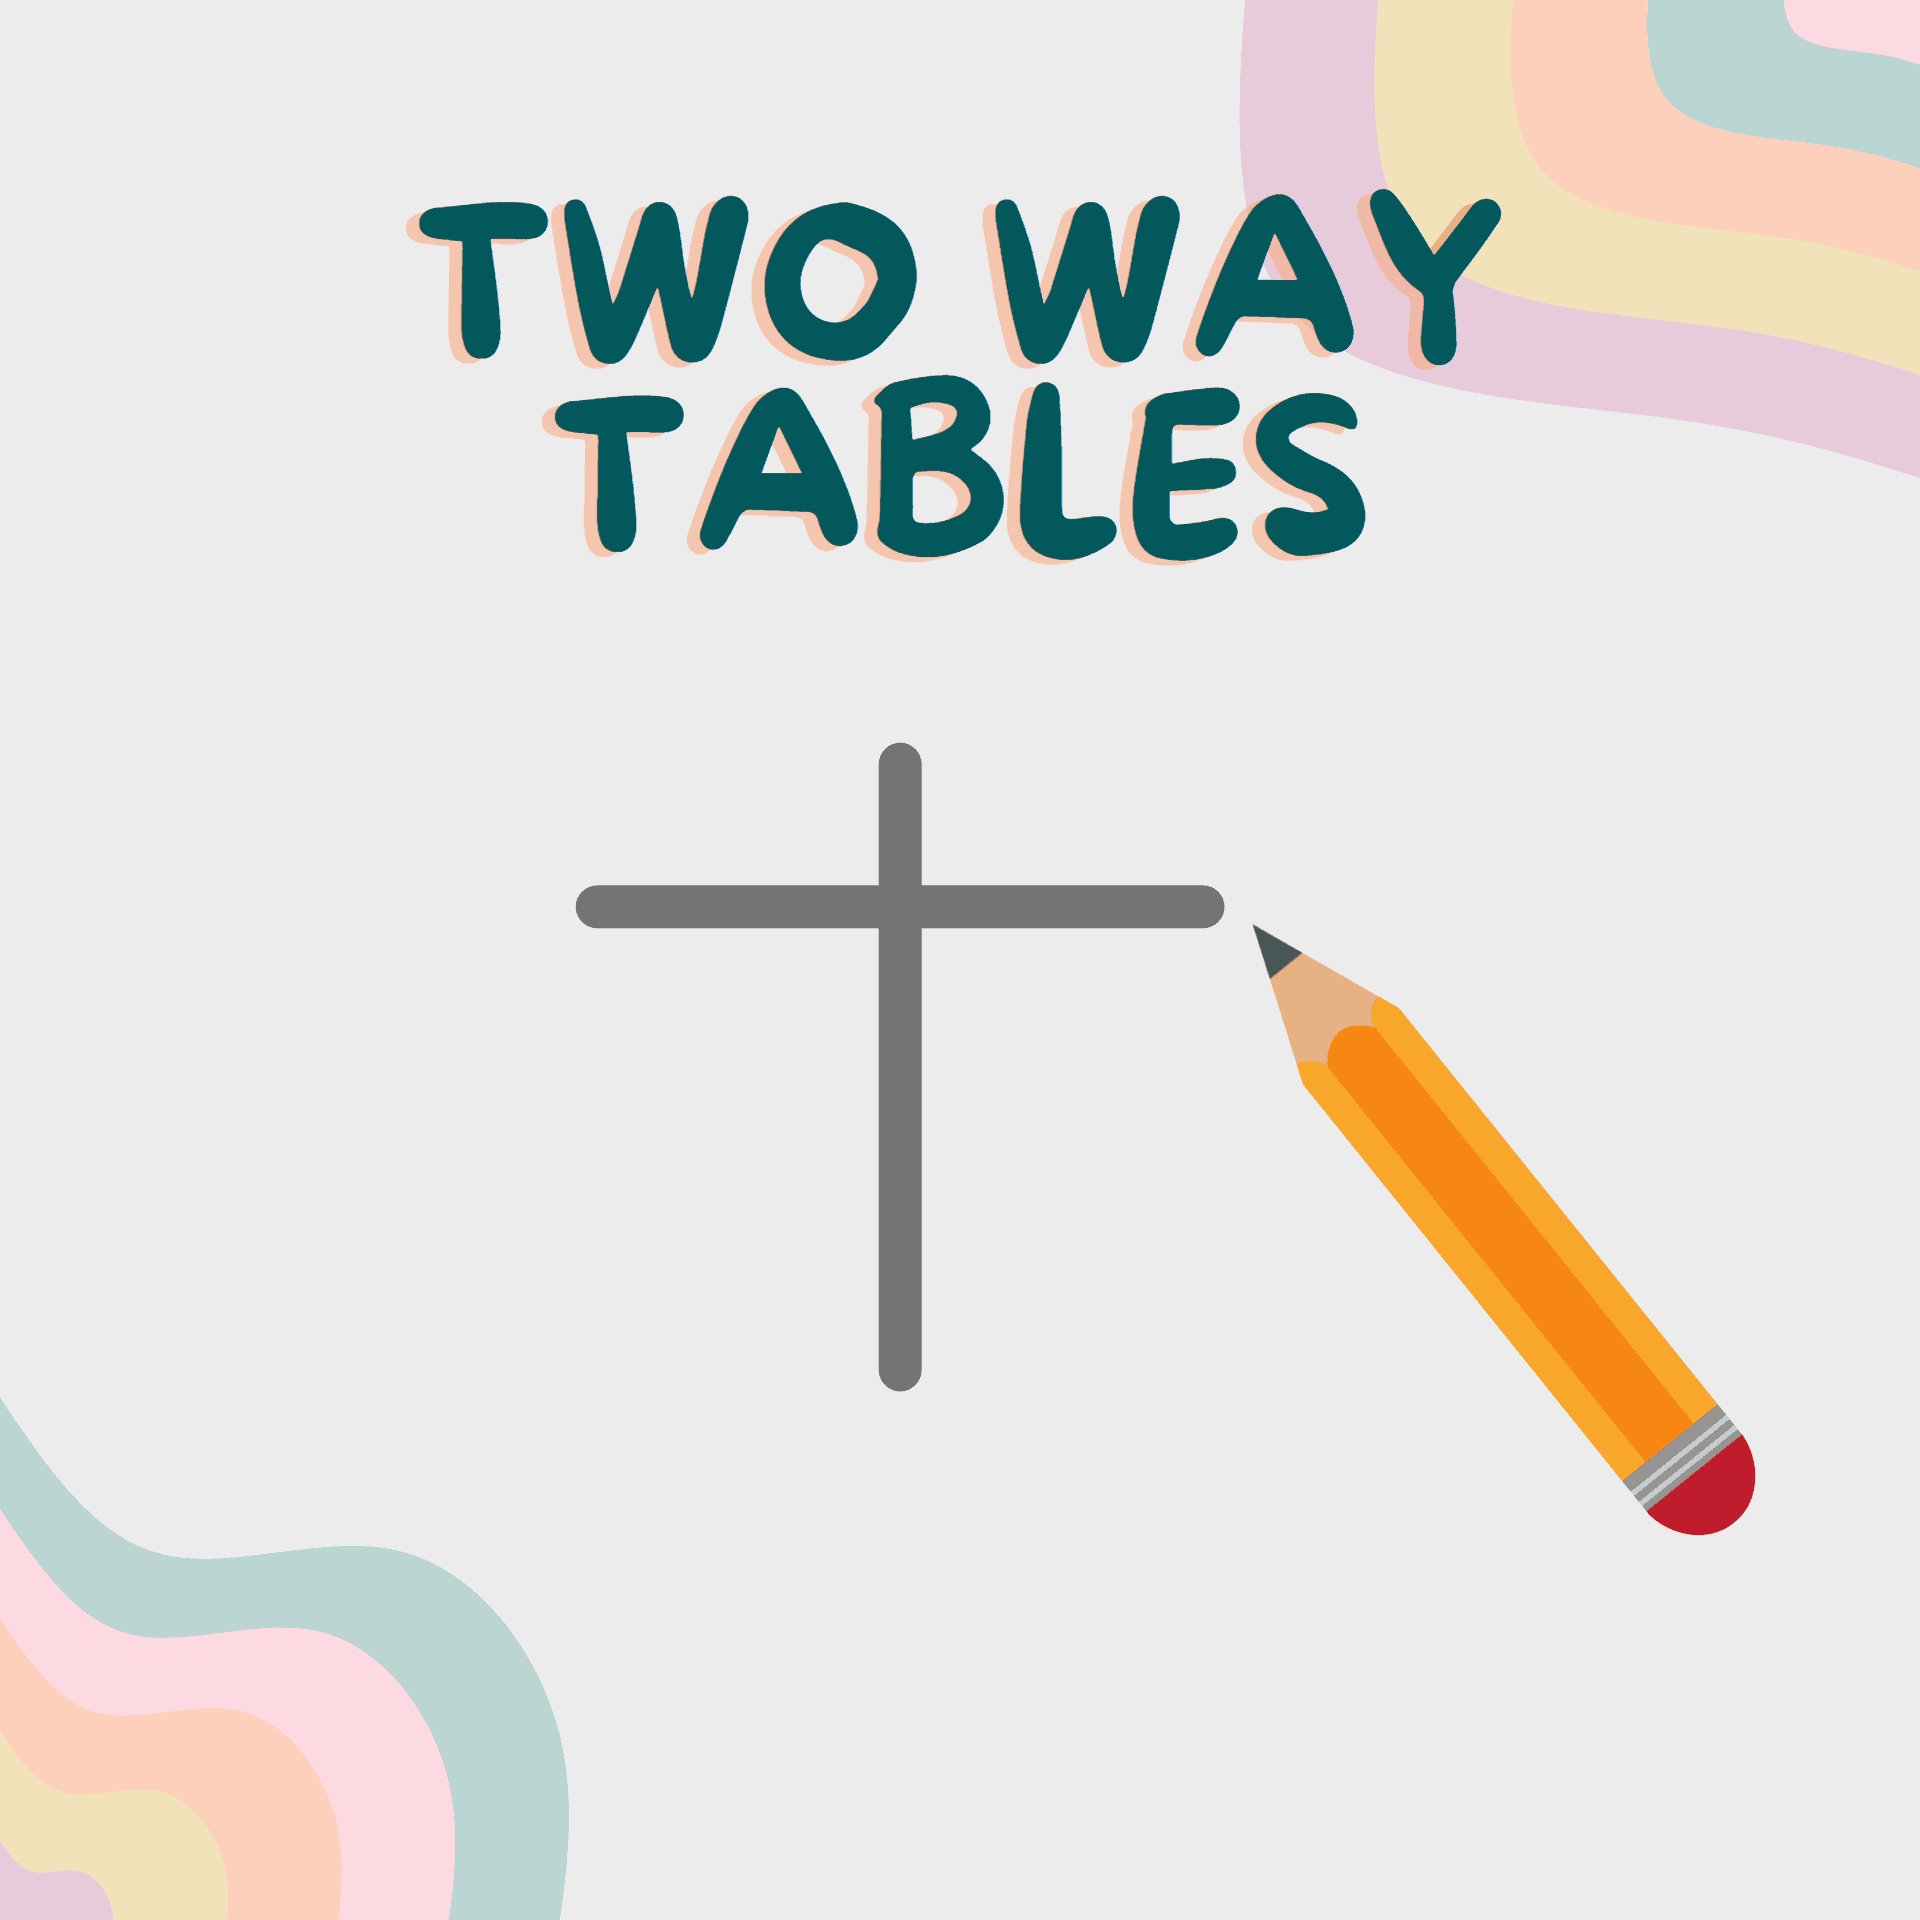 using two way table to describe Two Way Table Example